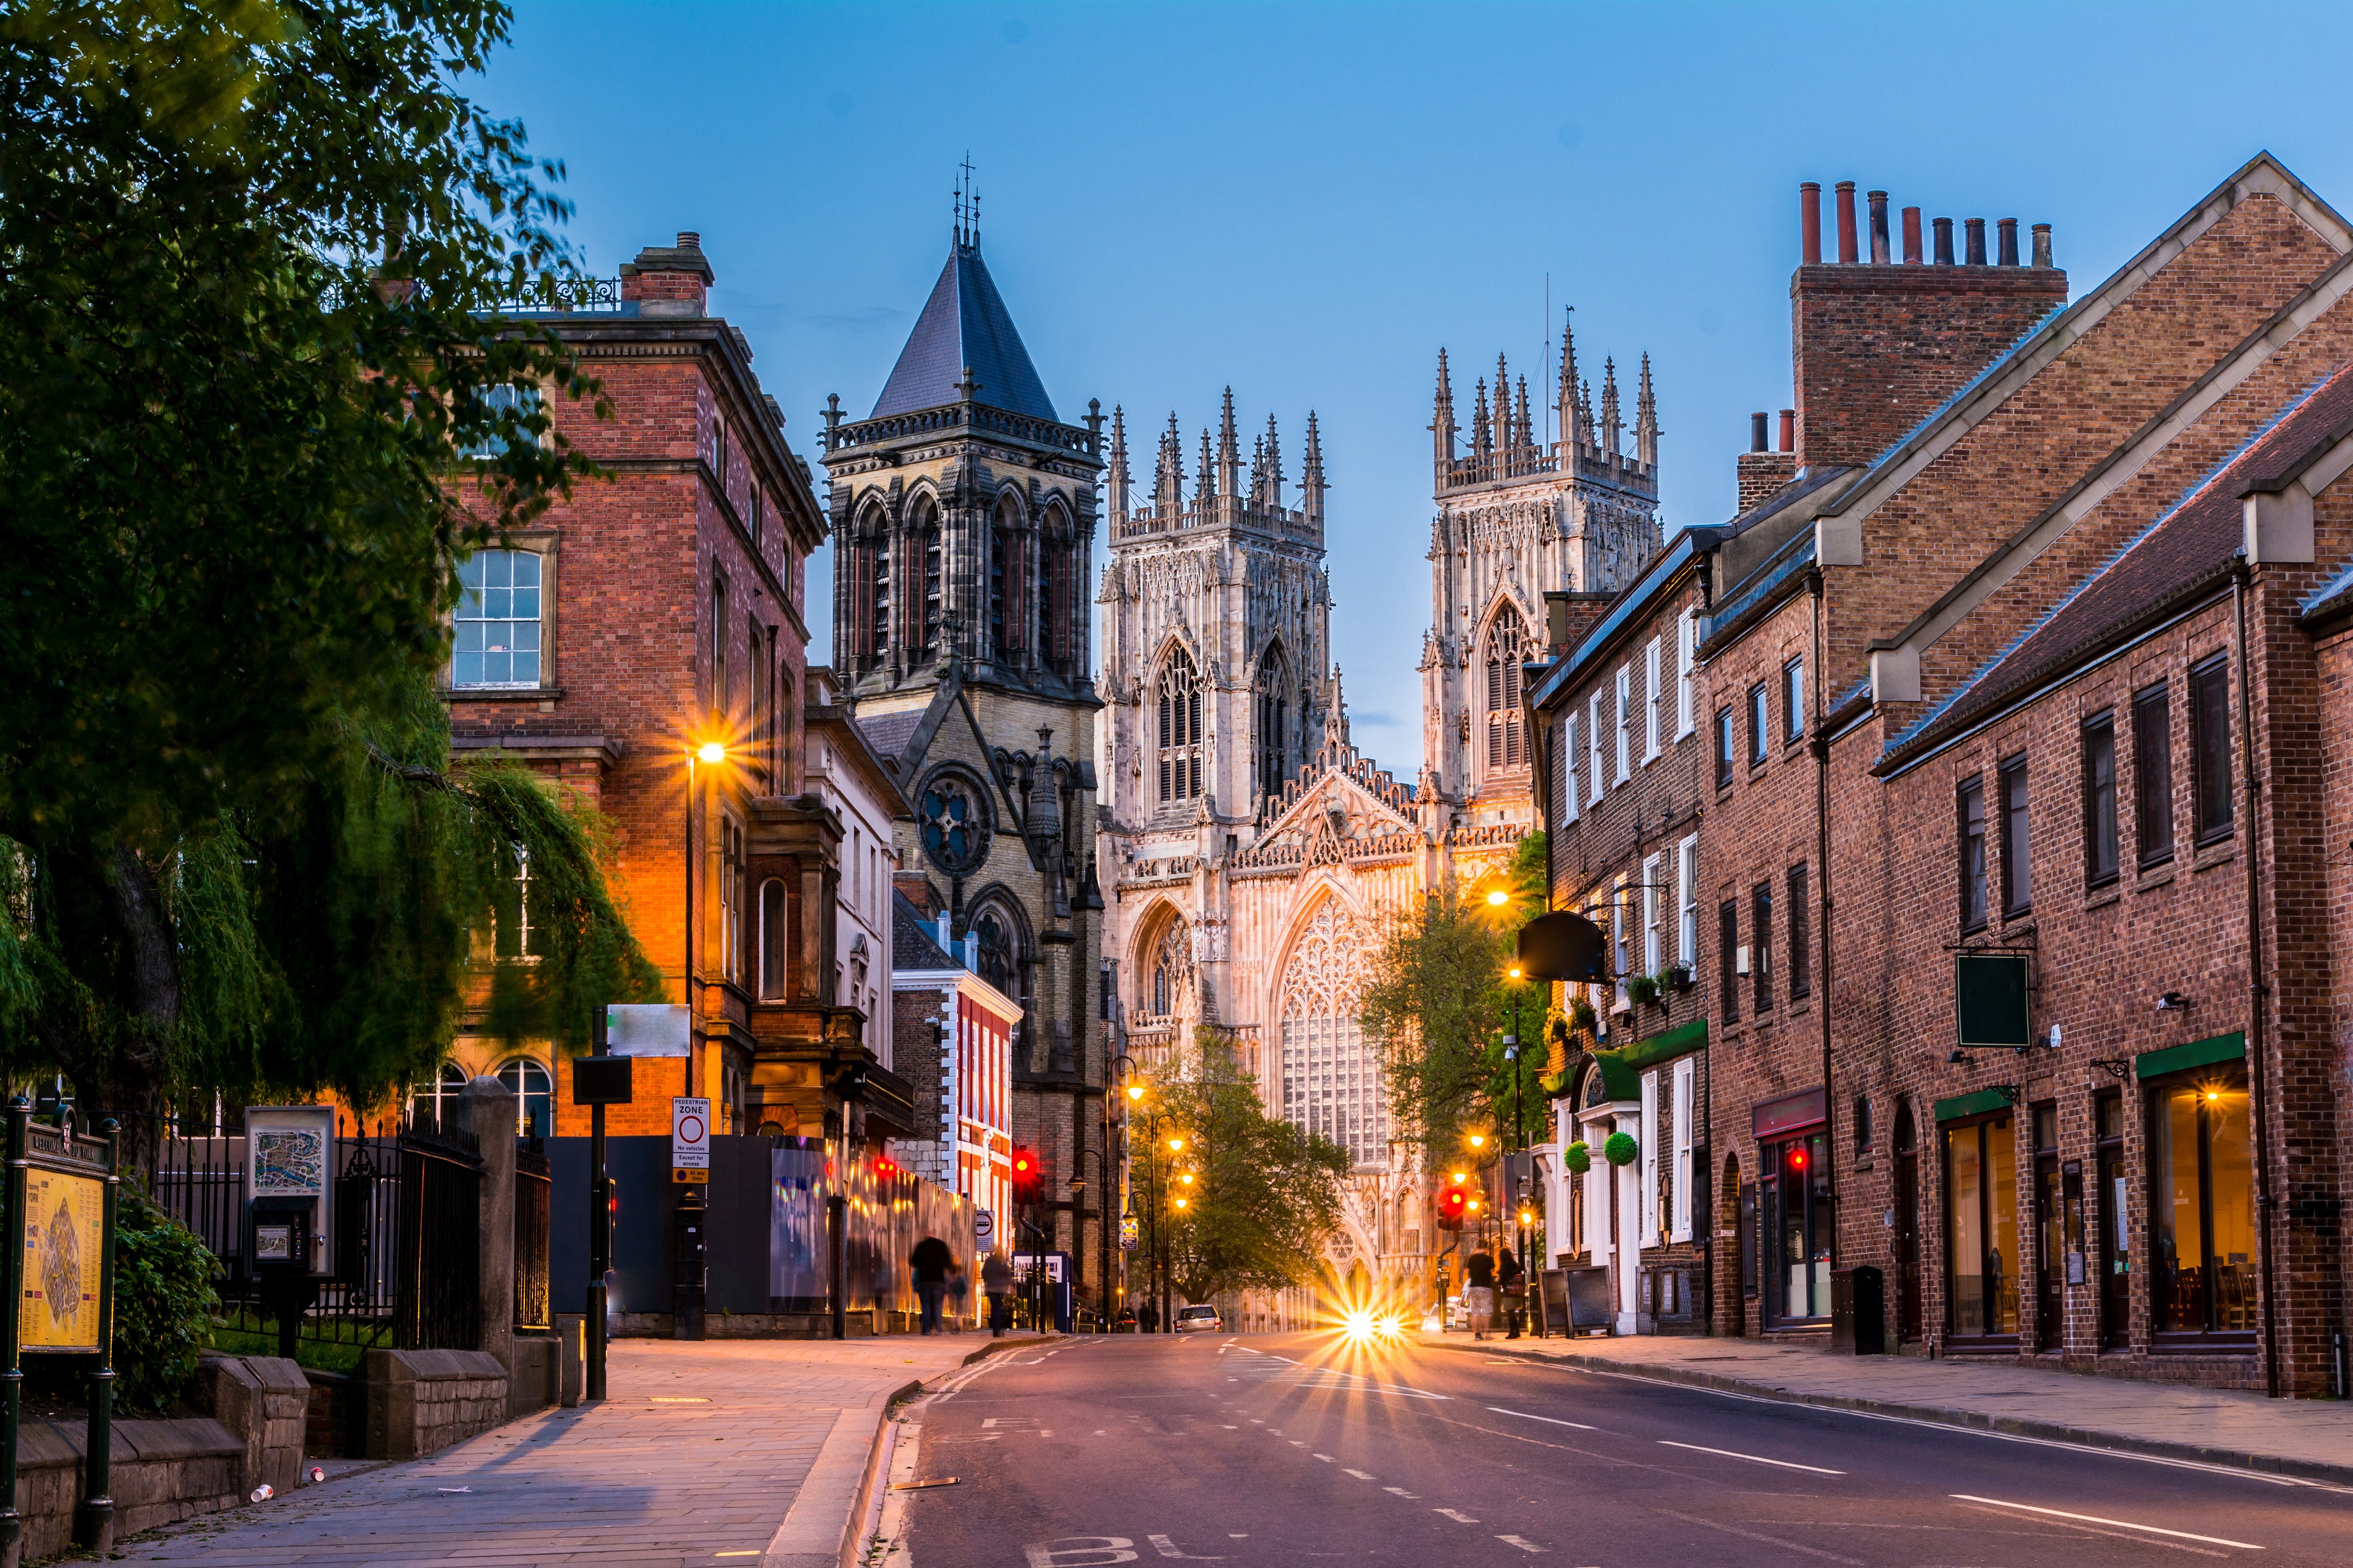 Amble through the historic streets of York's city centre